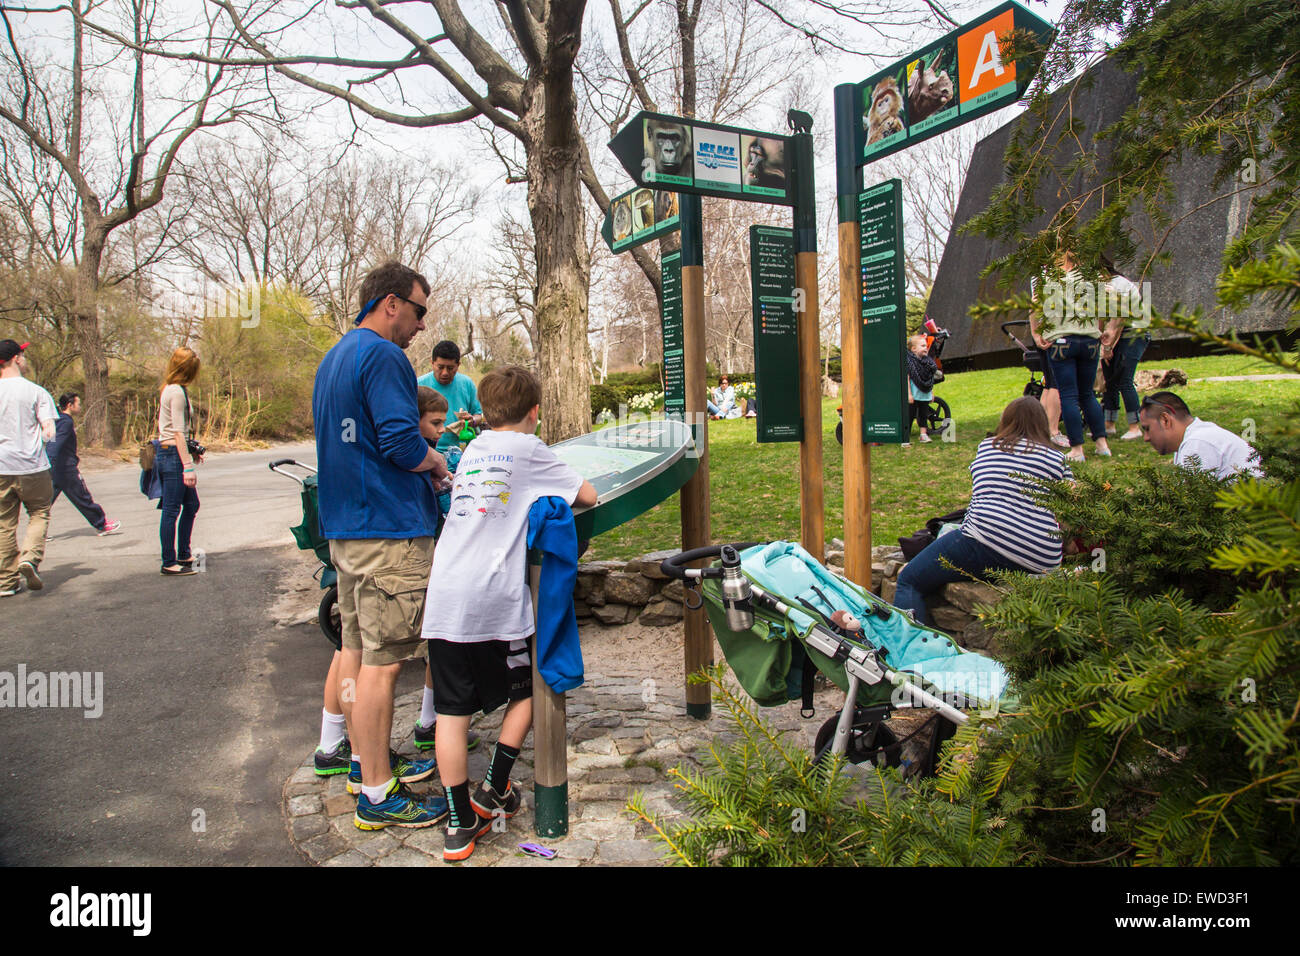 BRONX, NEW YORK - APRIL 14, 2014: View on Bronx Zoo with visitors viewing park map. Stock Photo